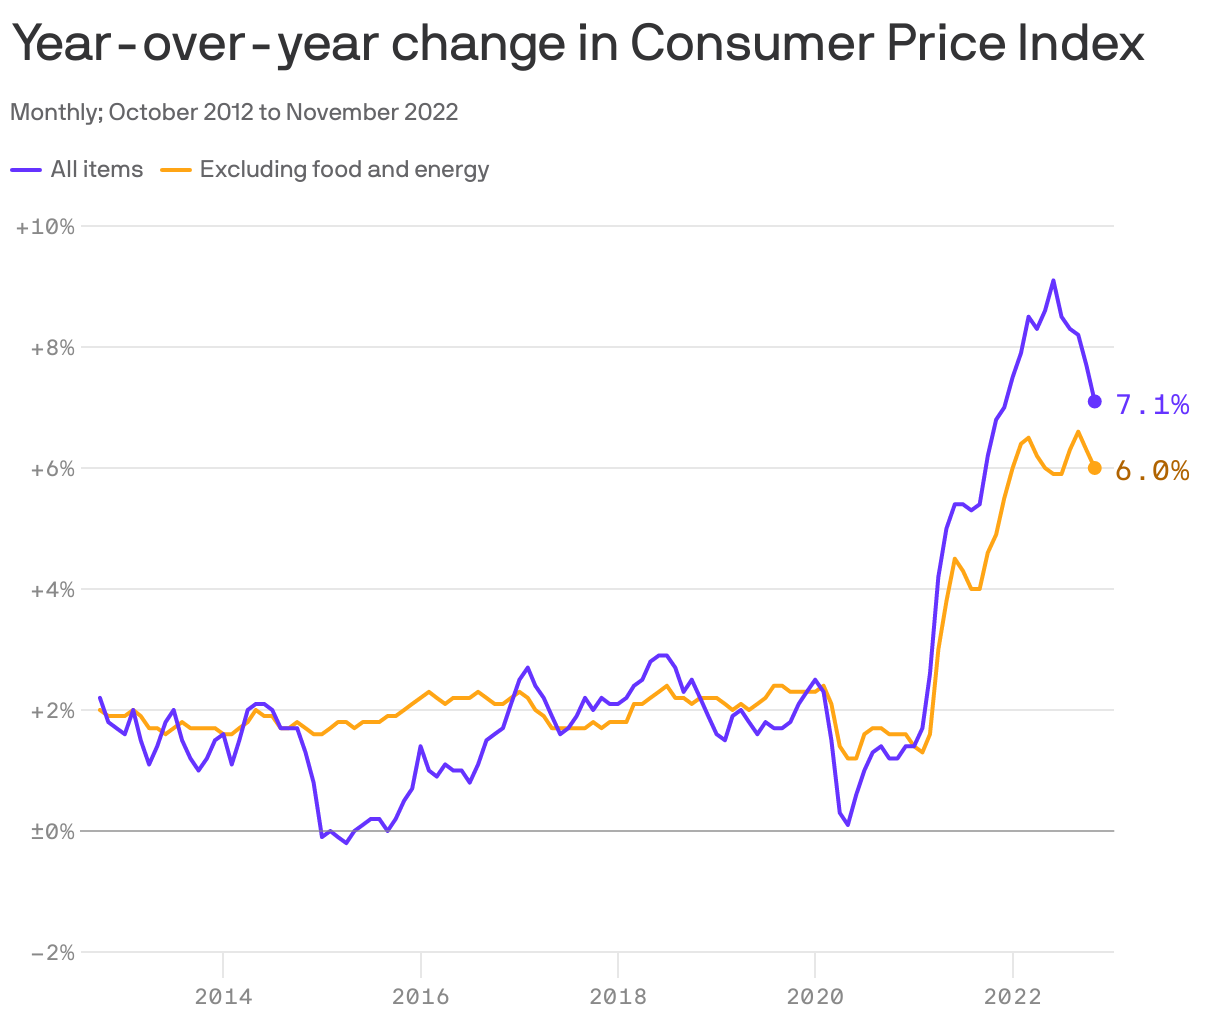 Year-over-year change in Consumer Price Index